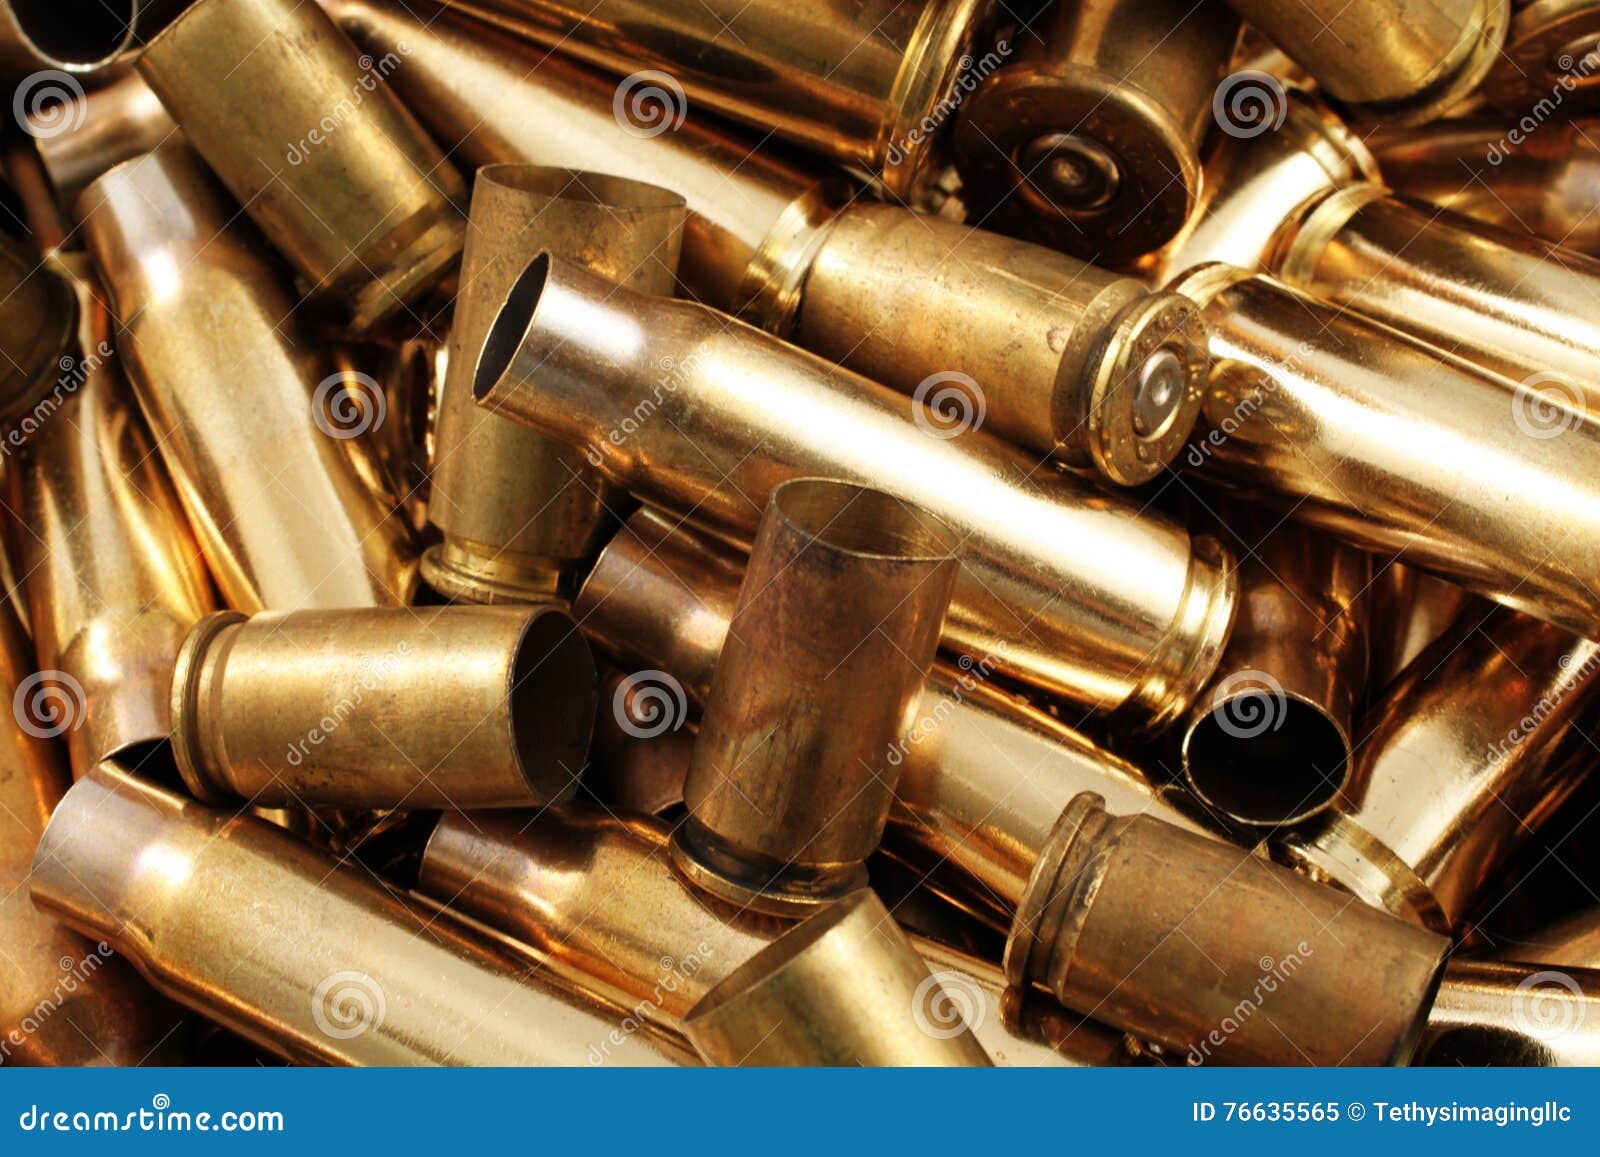 https://thumbs.dreamstime.com/z/empty-bullet-casings-close-up-used-assorted-spent-brass-76635565.jpg